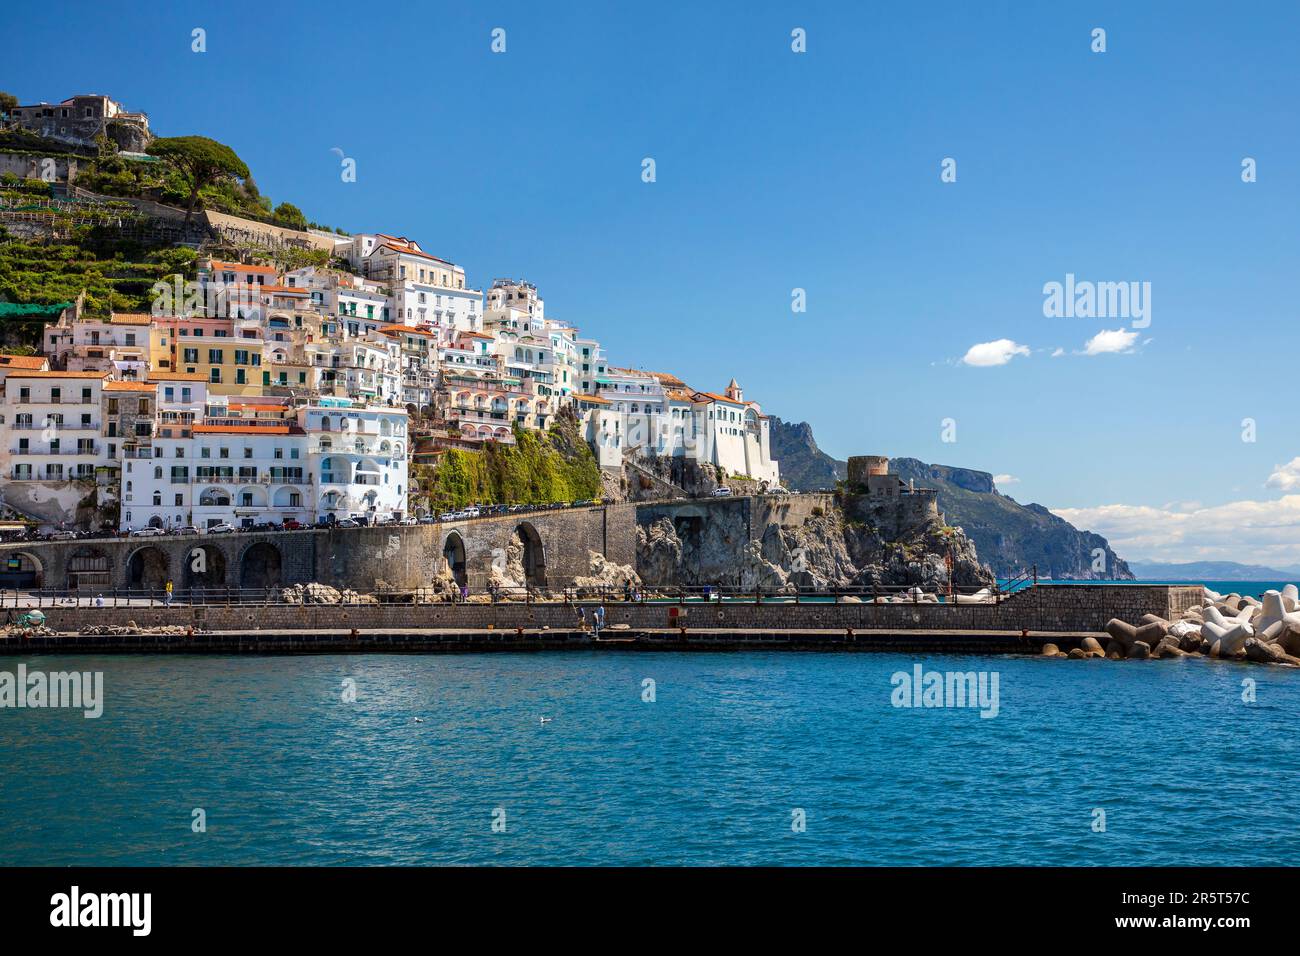 AMALFI TOWN, ITALY - APRIL 26th 2023: View of village of Amalfi, Italy, which  is a resort on Italian coast surrounded by cliffs and coastal scenery. Stock Photo